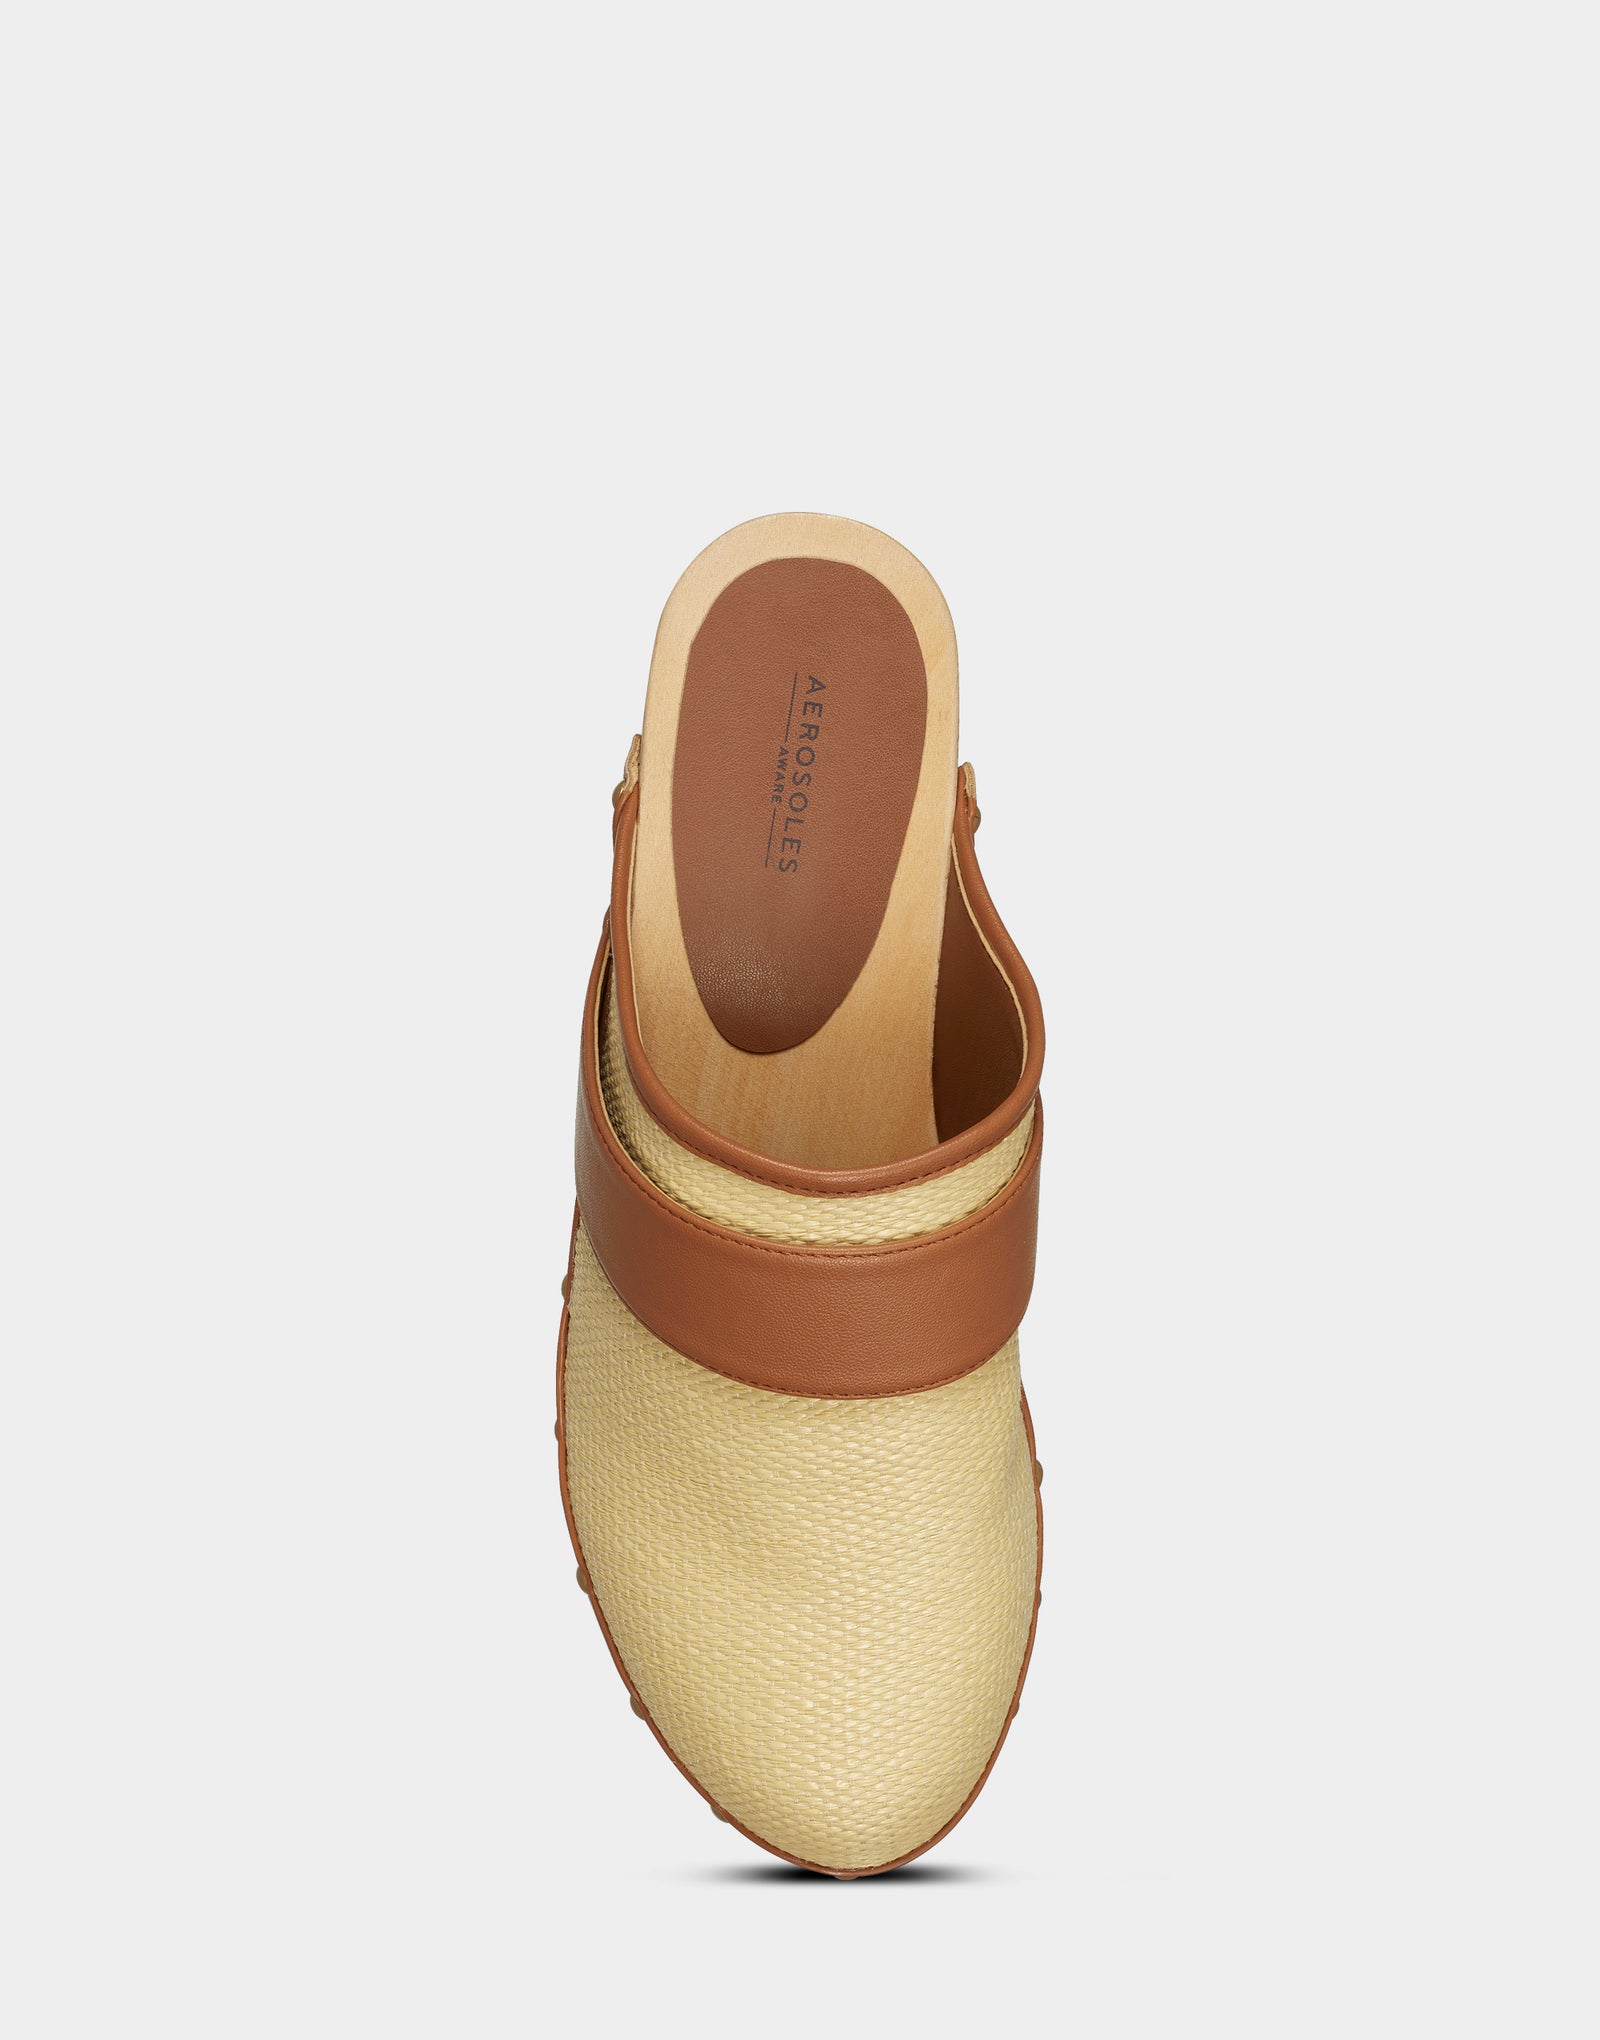 Women's Clog in Natural Combo